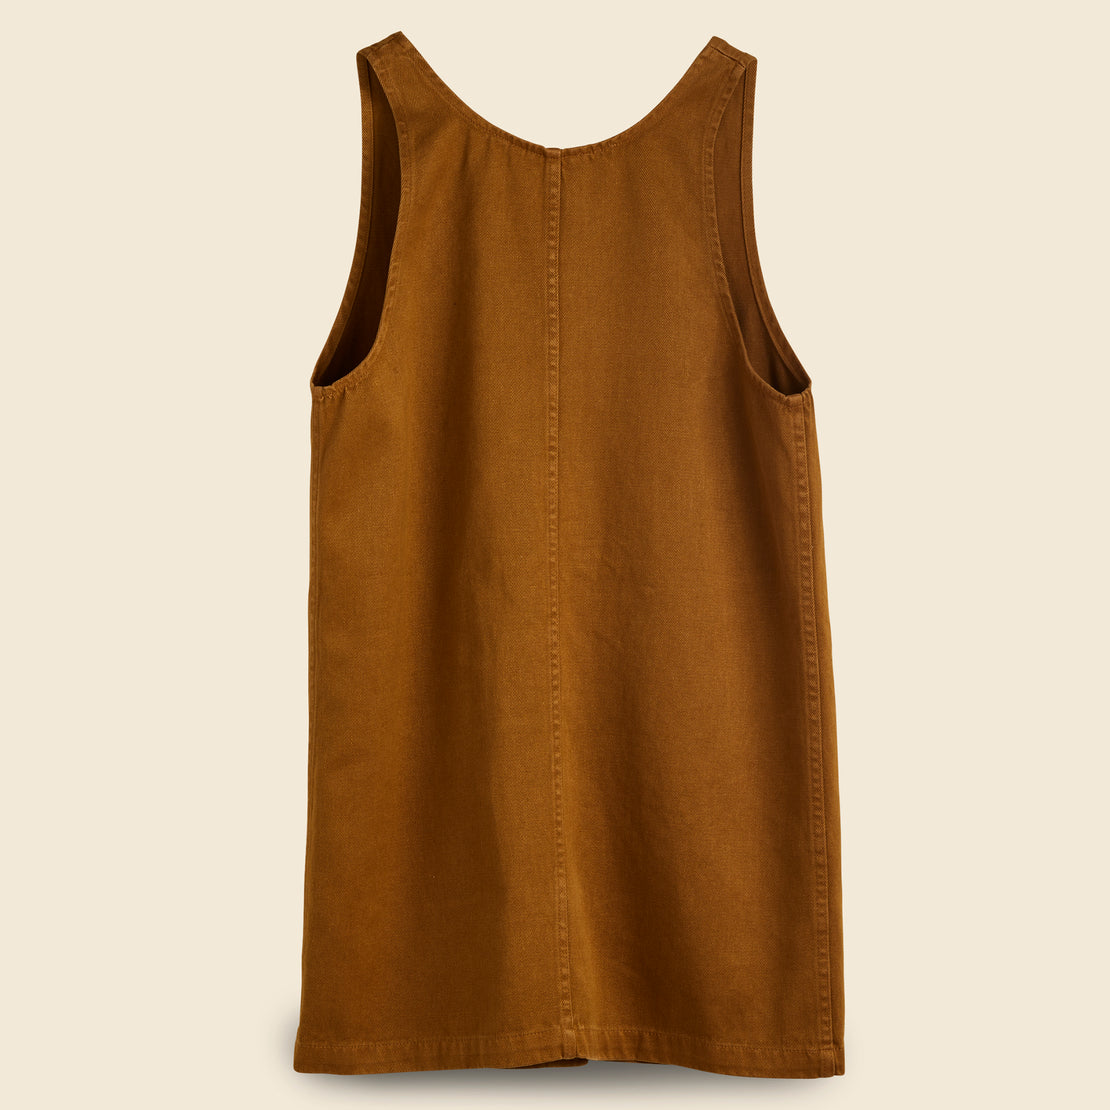 Jumper Dress - Copper - Jungmaven - STAG Provisions - W - Onepiece - Dress